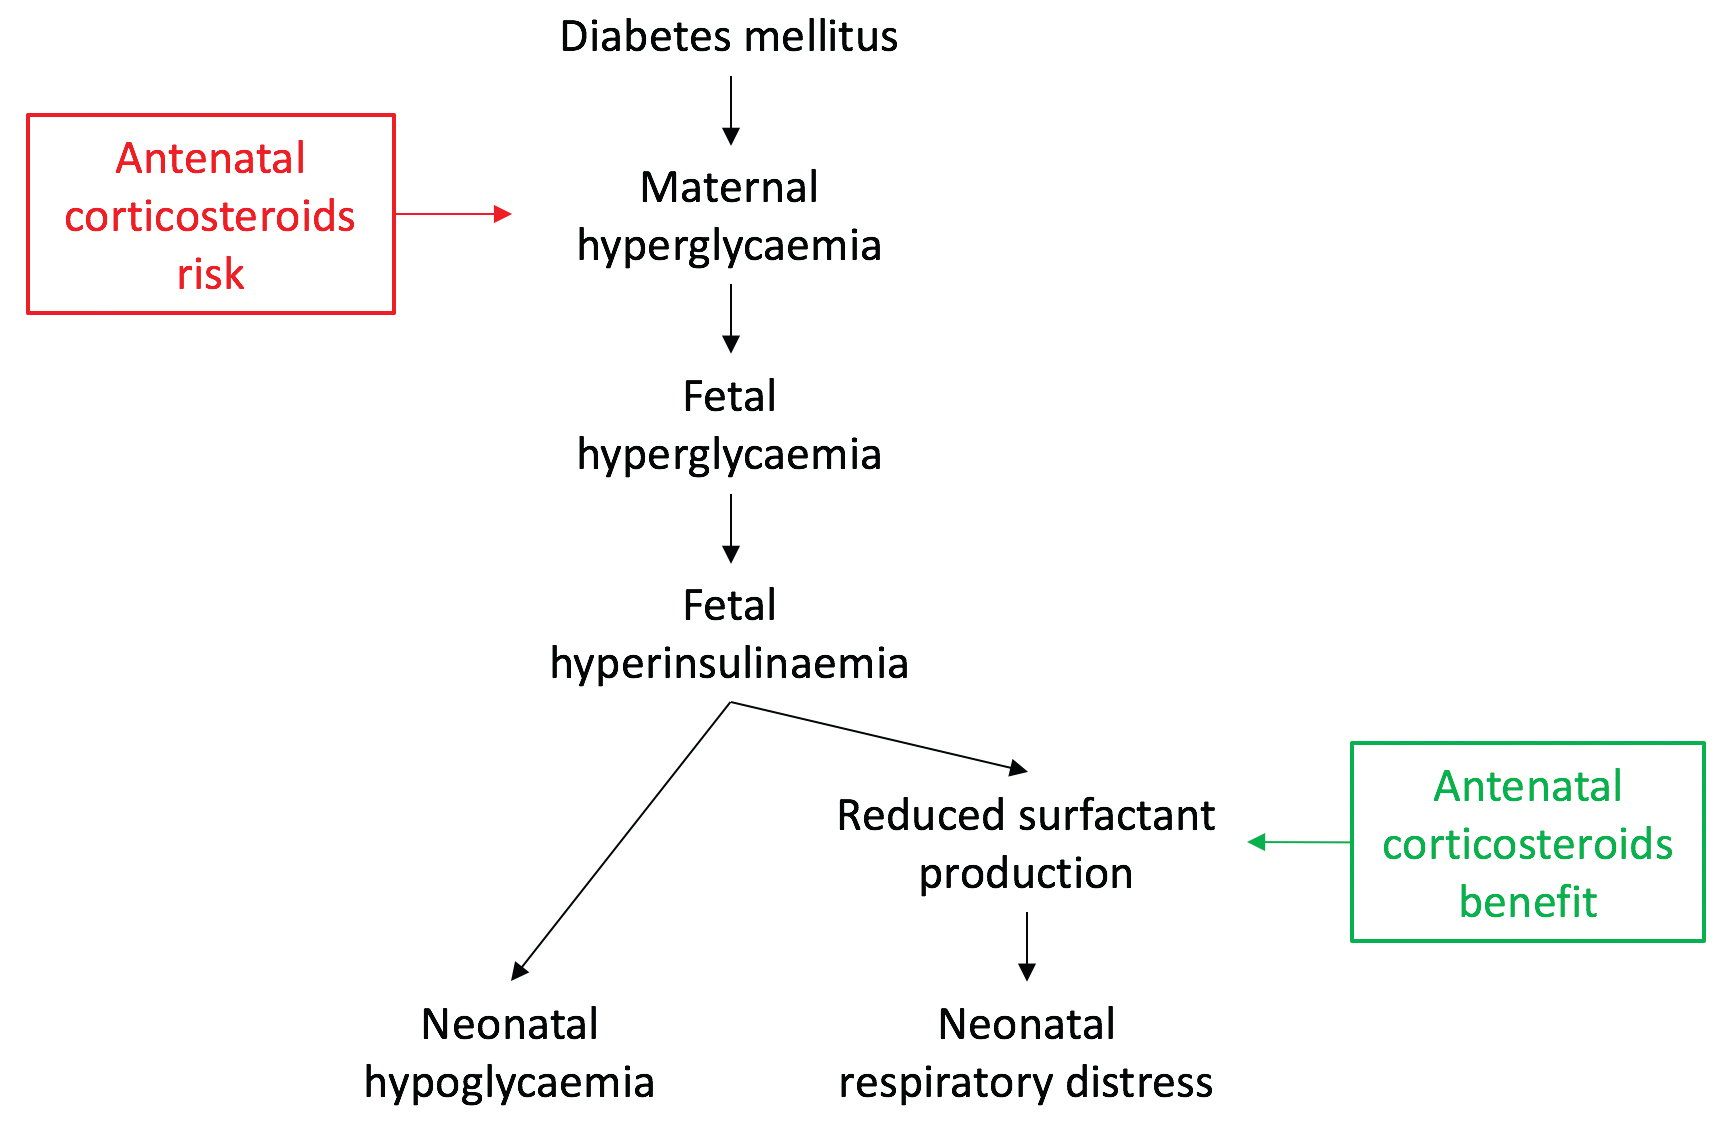 Figure 1. Mechanism of neonatal respiratory distress and hypoglycaemia in diabetes in pregnancy and the potential benefits and harms of antenatal corticosteroids.